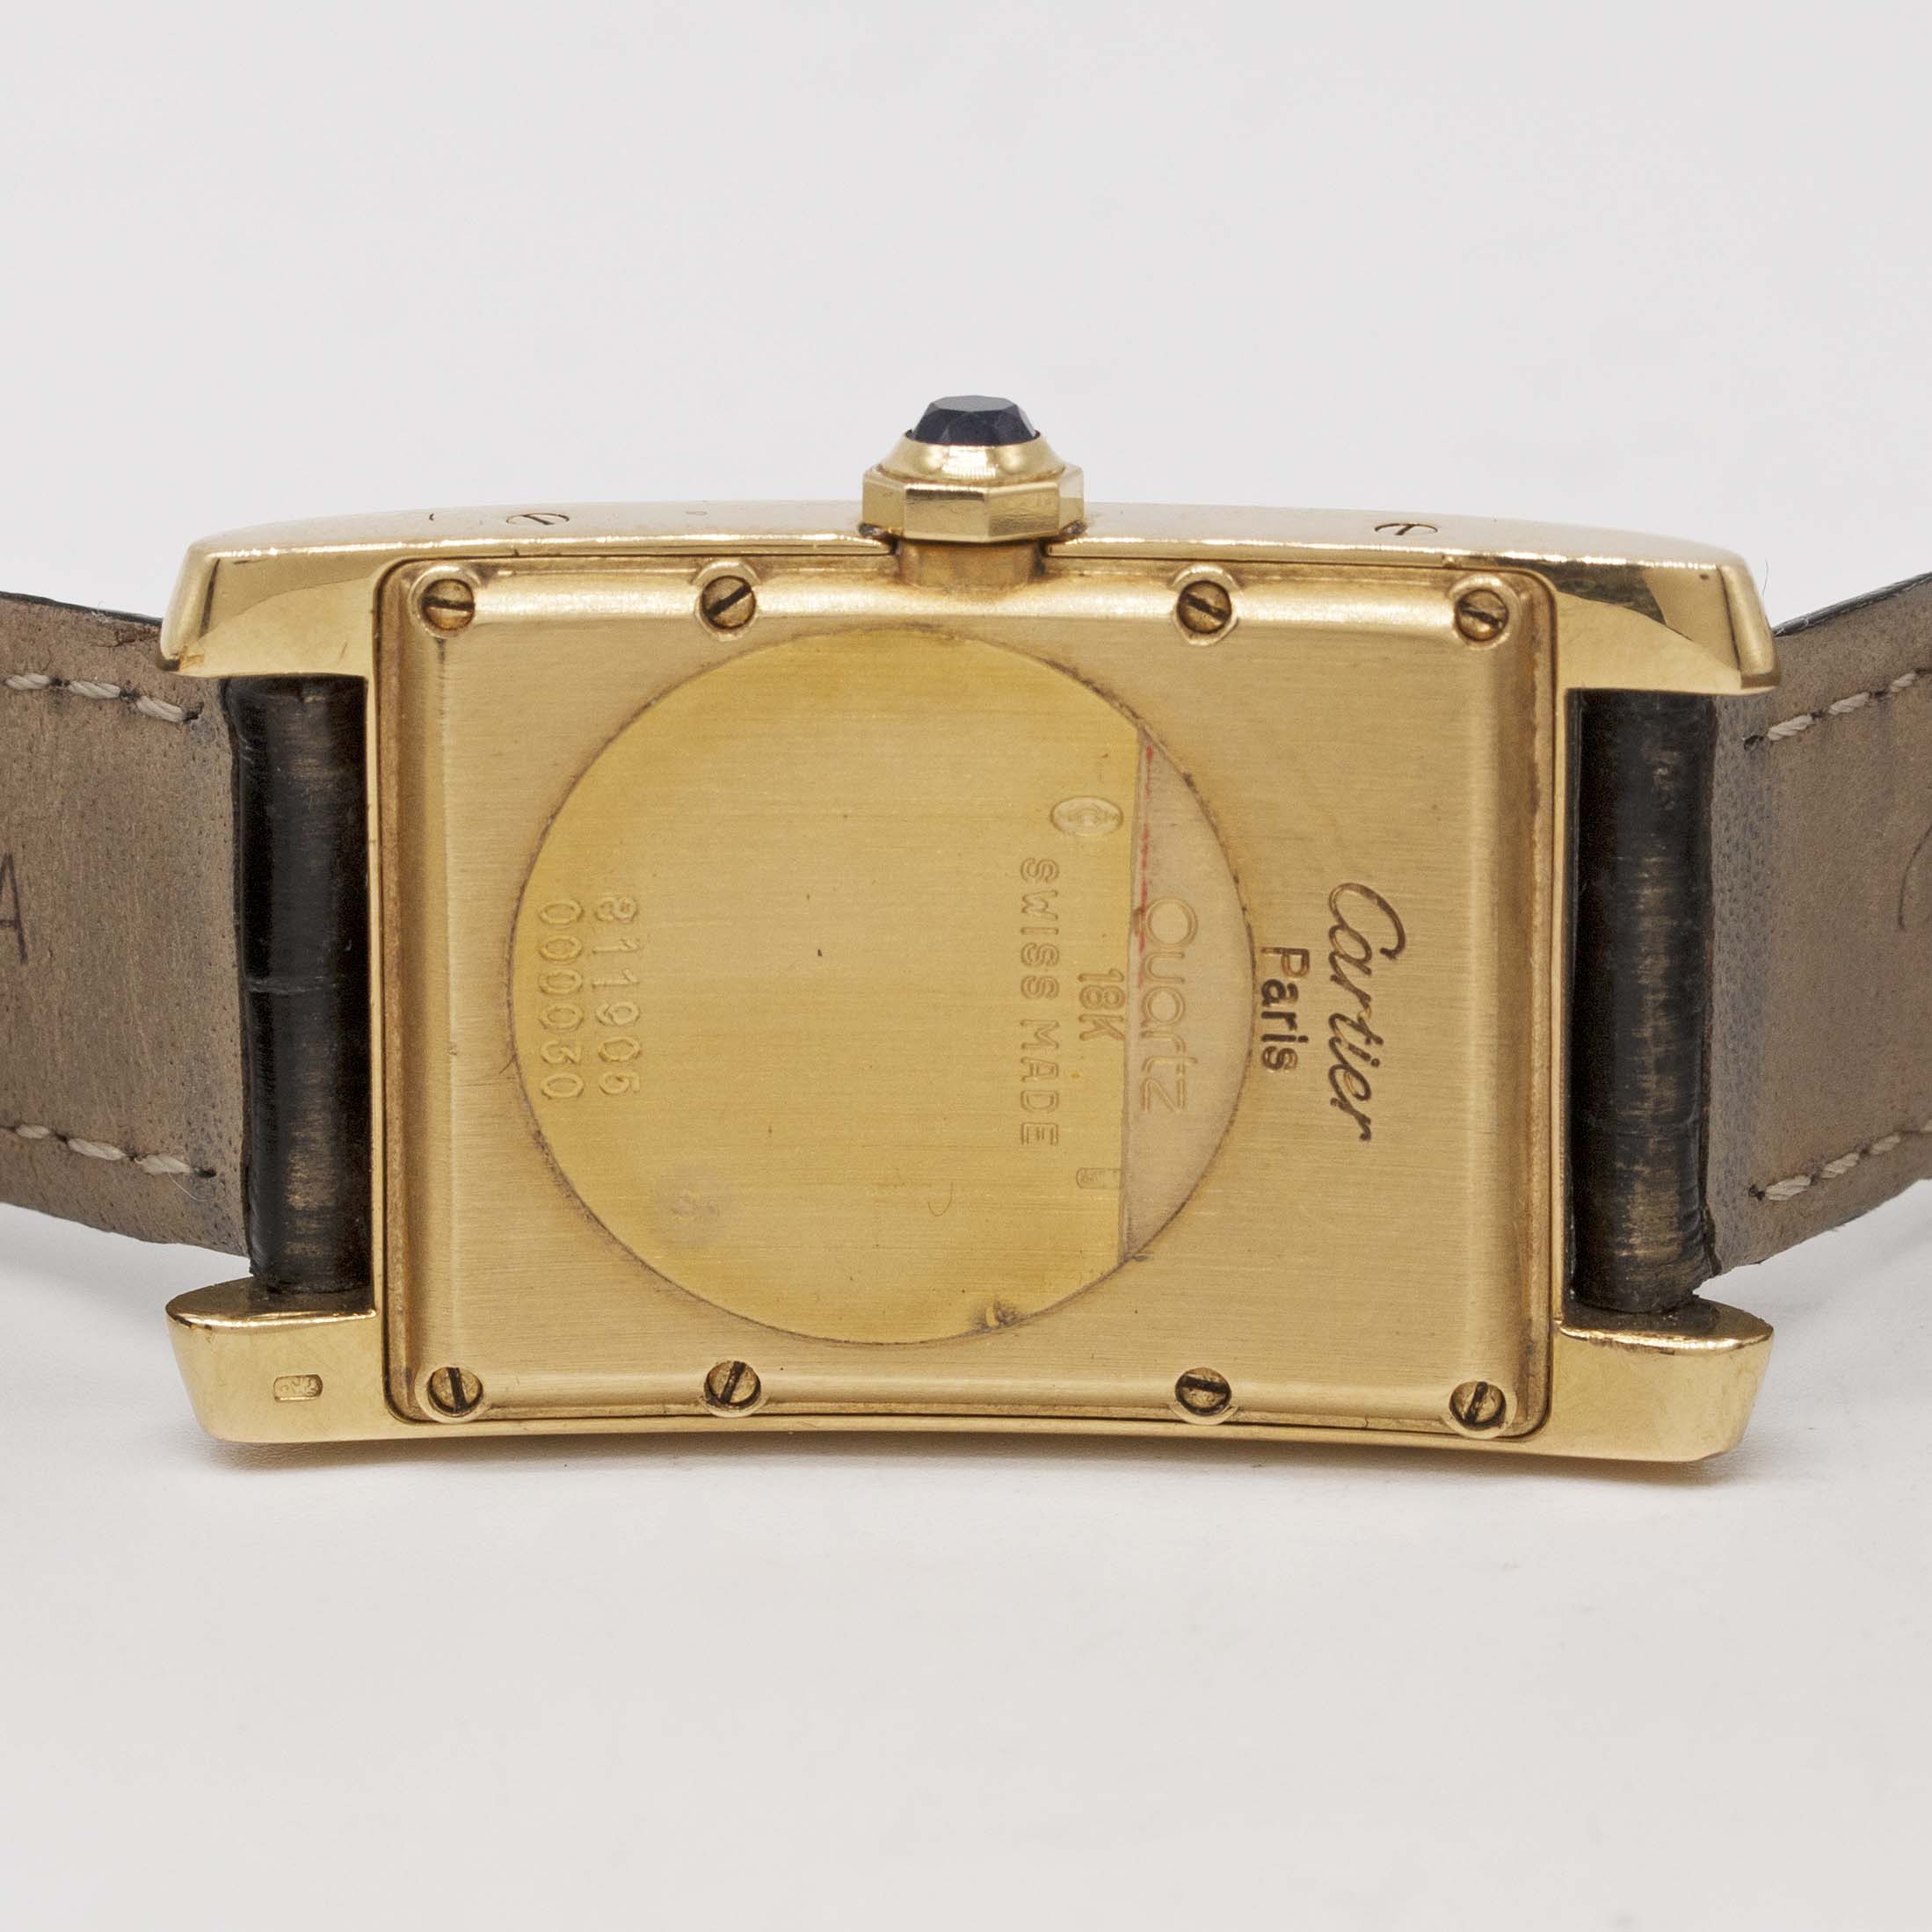 A GENTLEMAN'S SIZE 18K SOLID GOLD CARTIER TANK AMERICAINE WRIST WATCH CIRCA 1990, REF. 811905 - Image 3 of 3